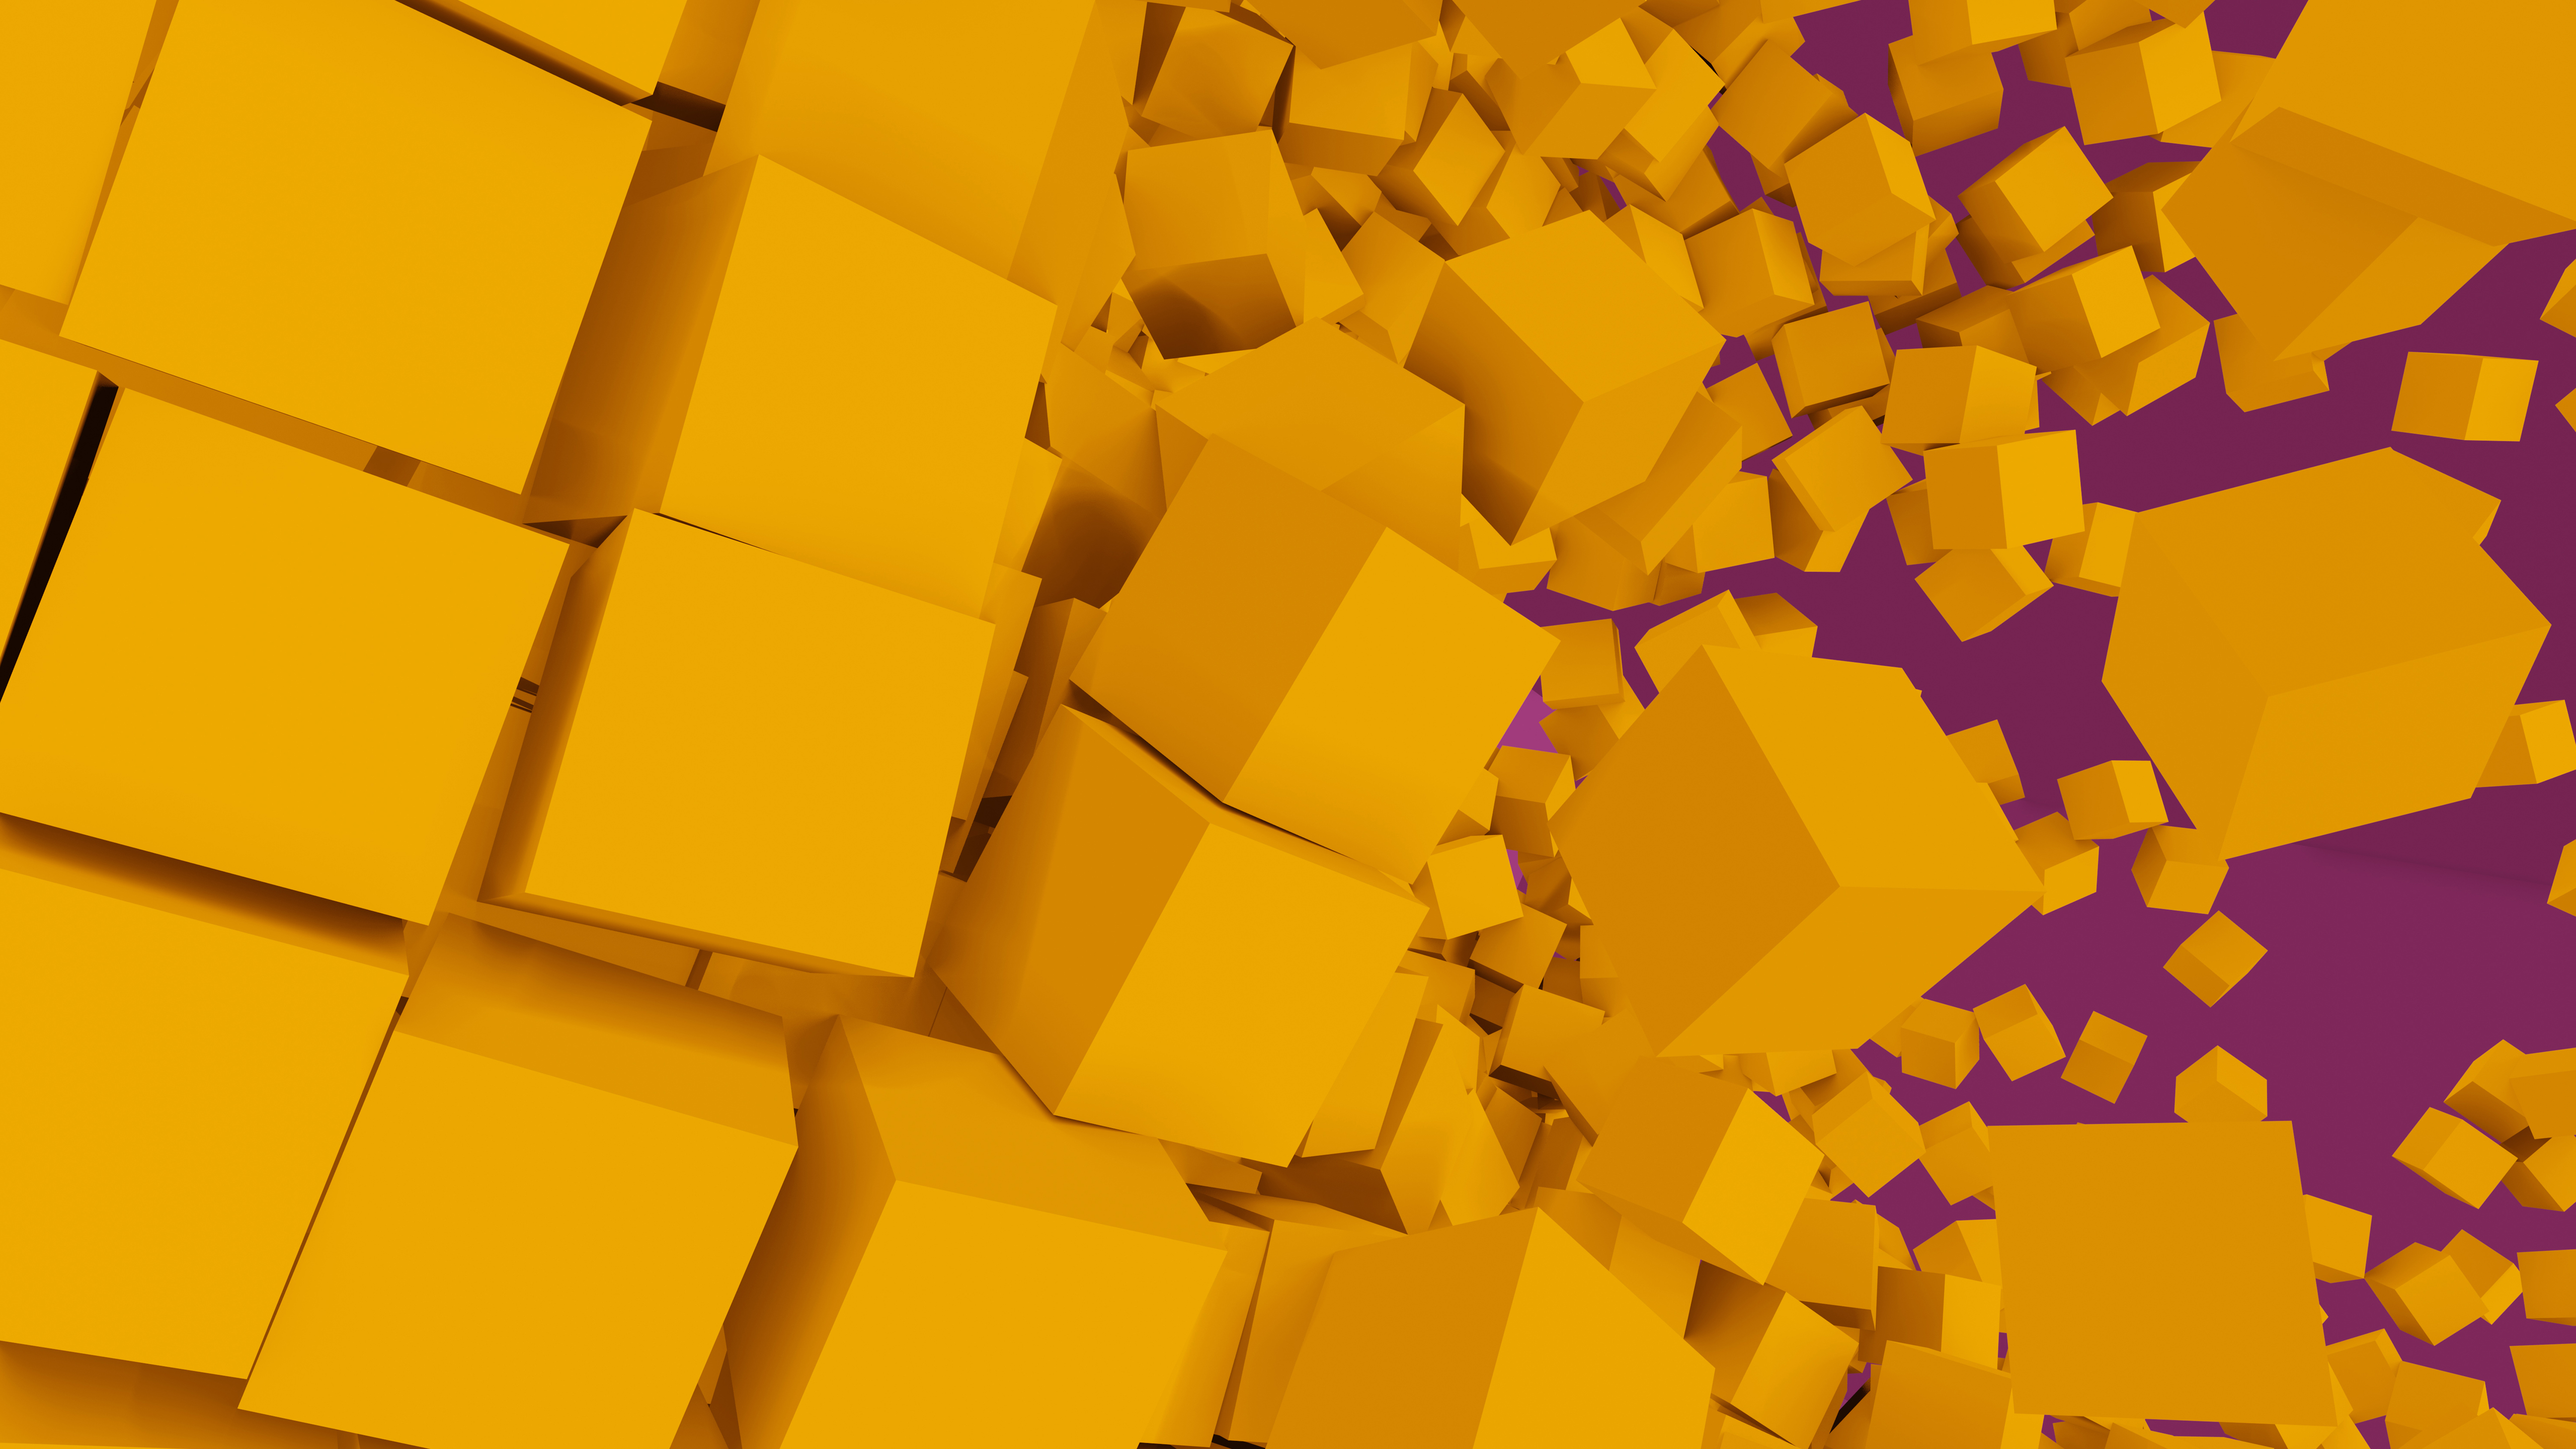 Abstract Cube HD Wallpaper | Background Image